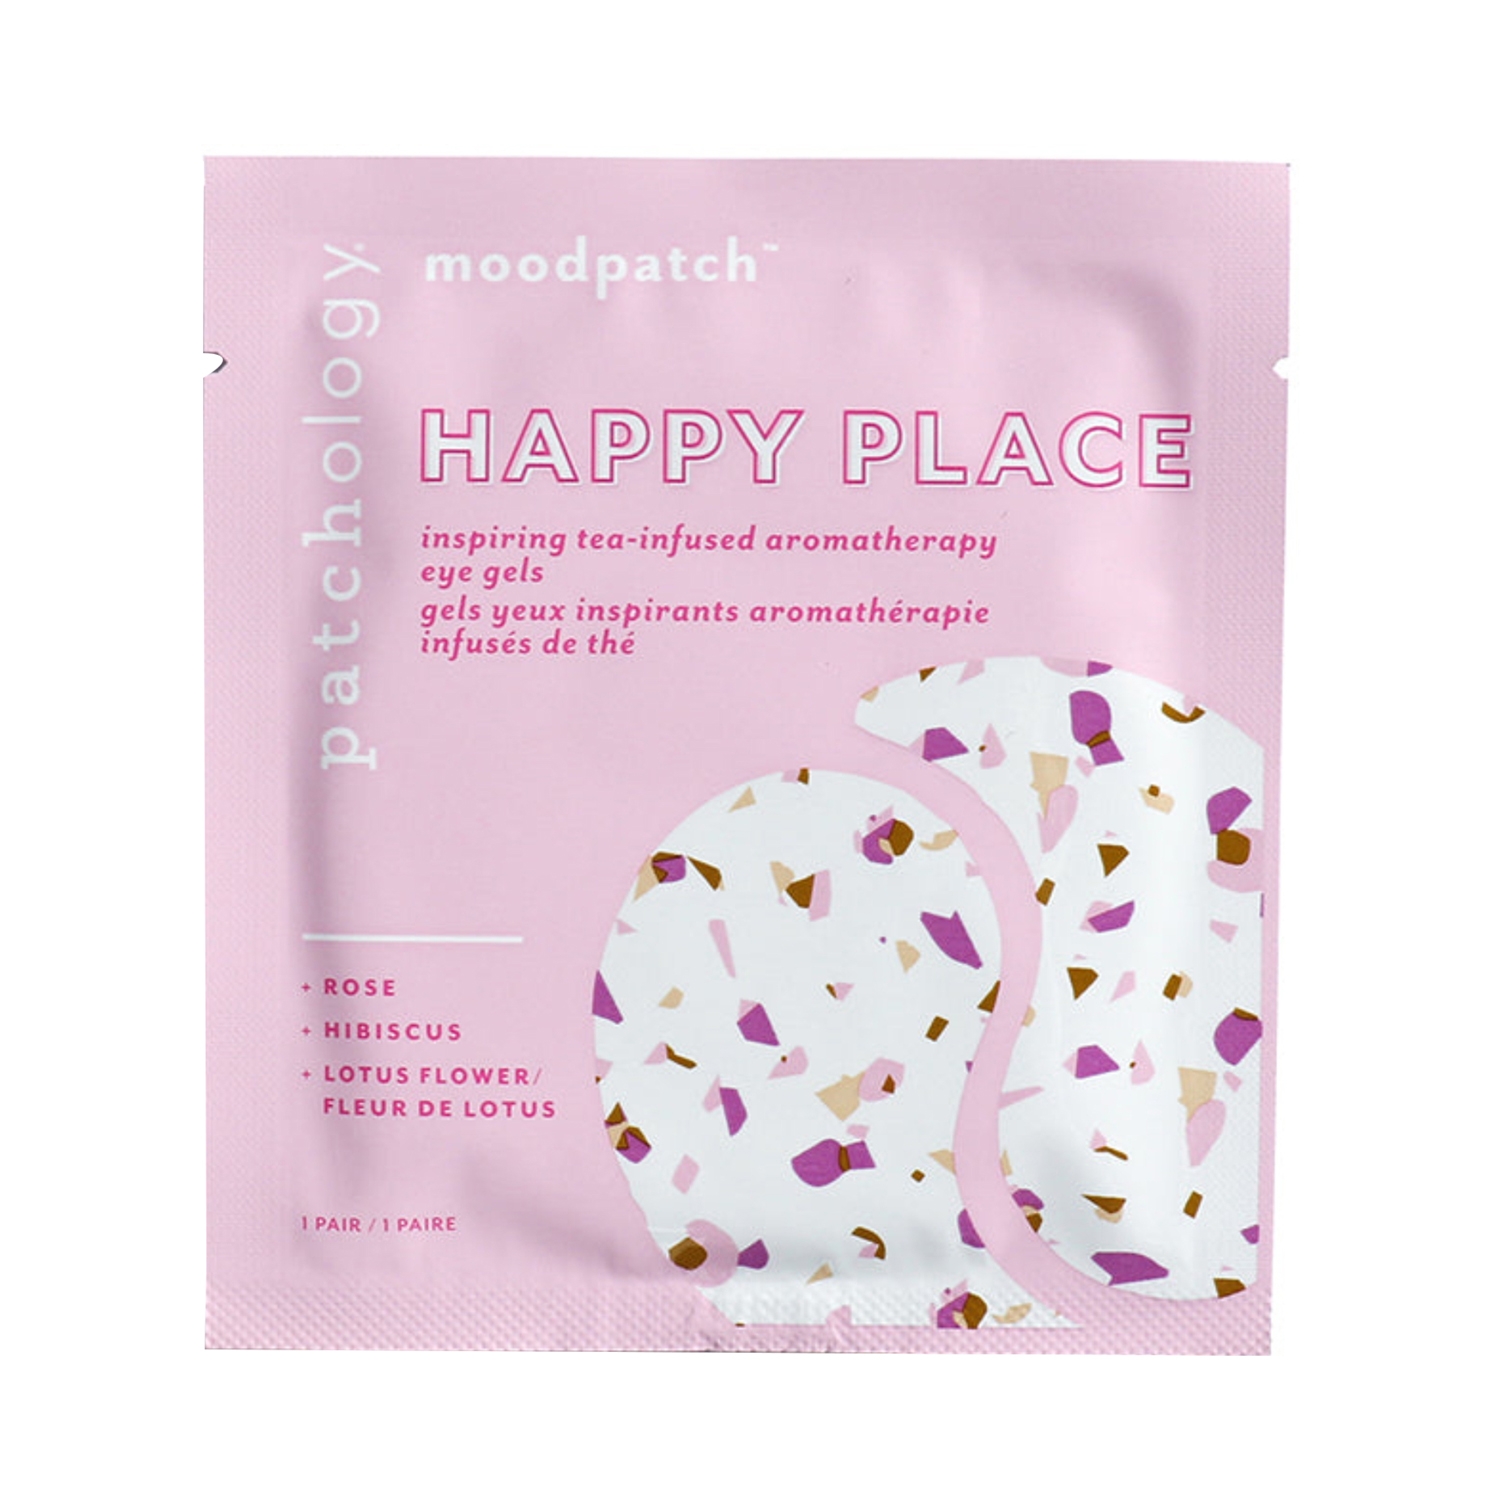 Patchology Moodpatch Happy Place Eye Gel Patches